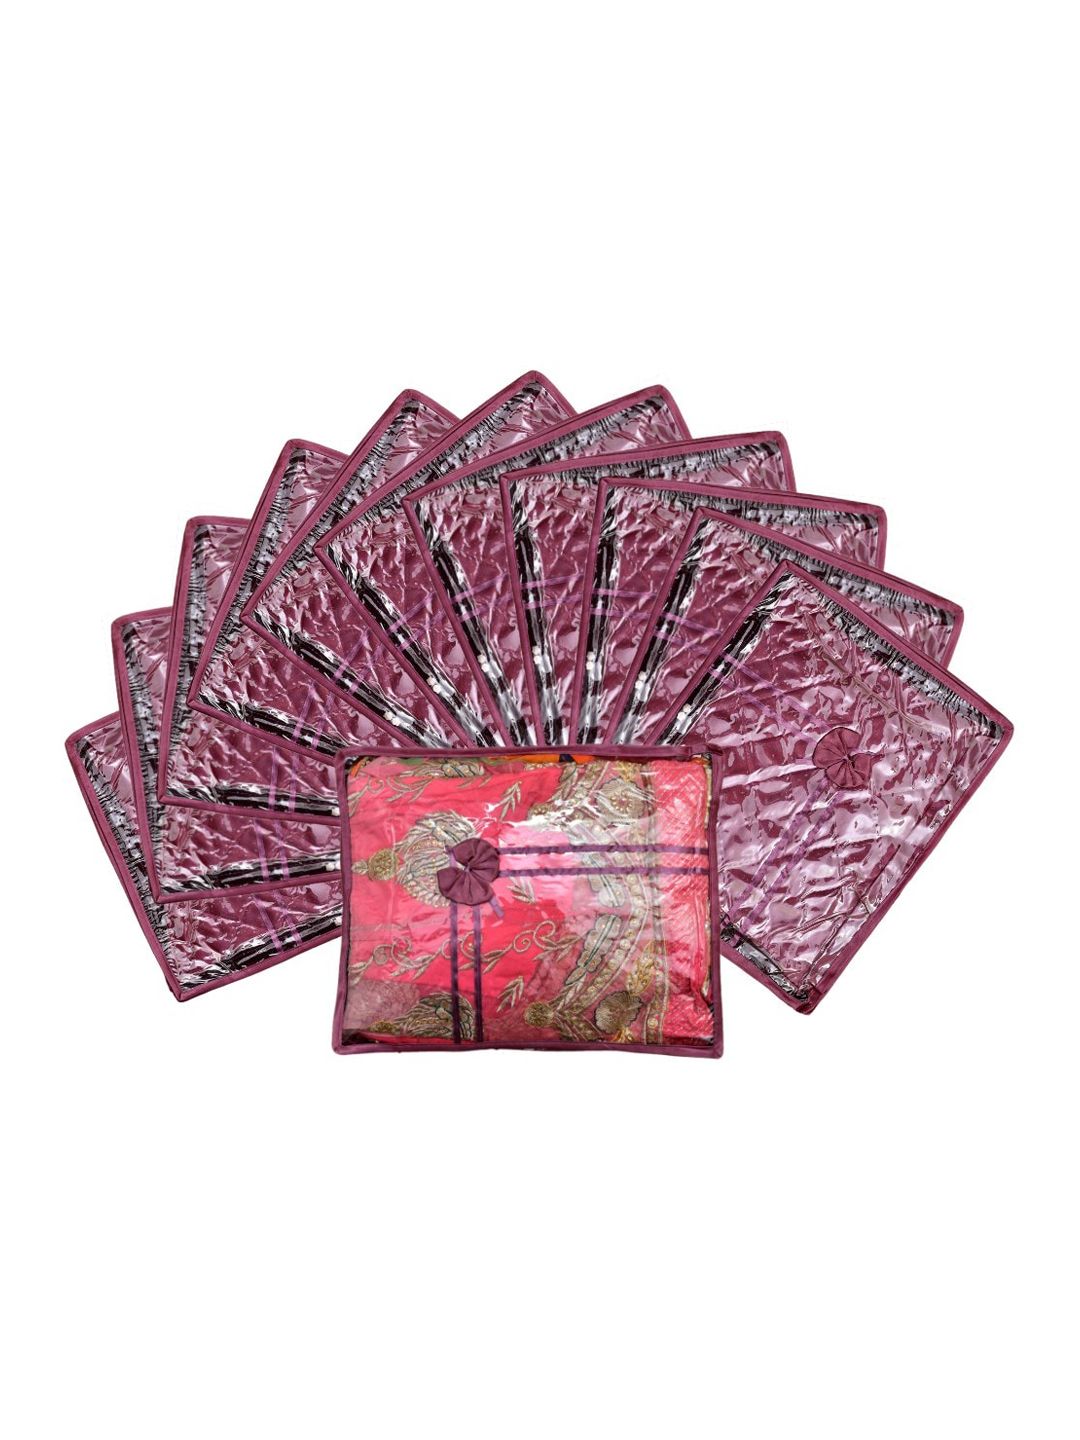 Kuber Industries Set Of 12 Purple & Transparent Solid Satin Single Packing Saree Cover Organizers Price in India